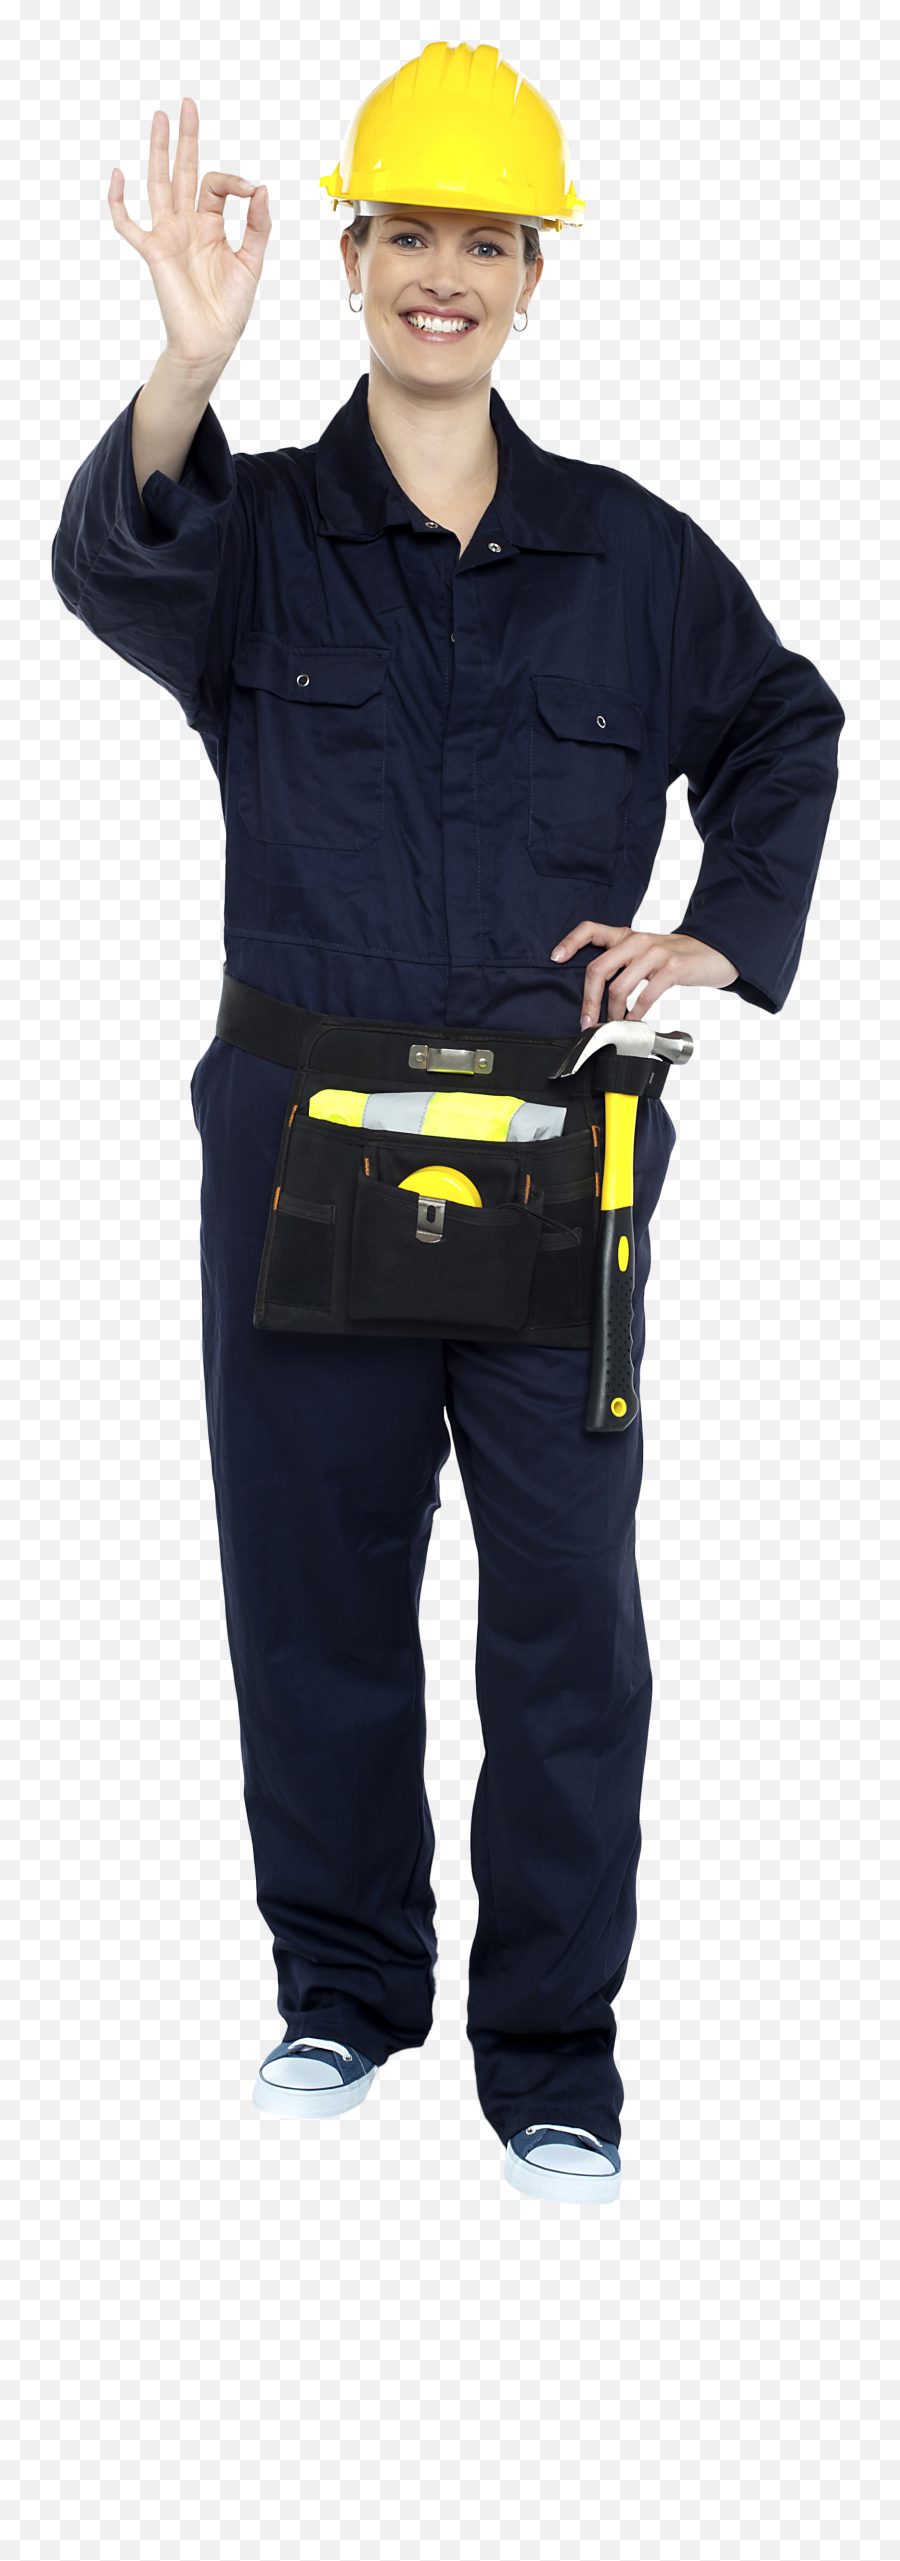 Engineer Clipart Blue Collar Worker Png